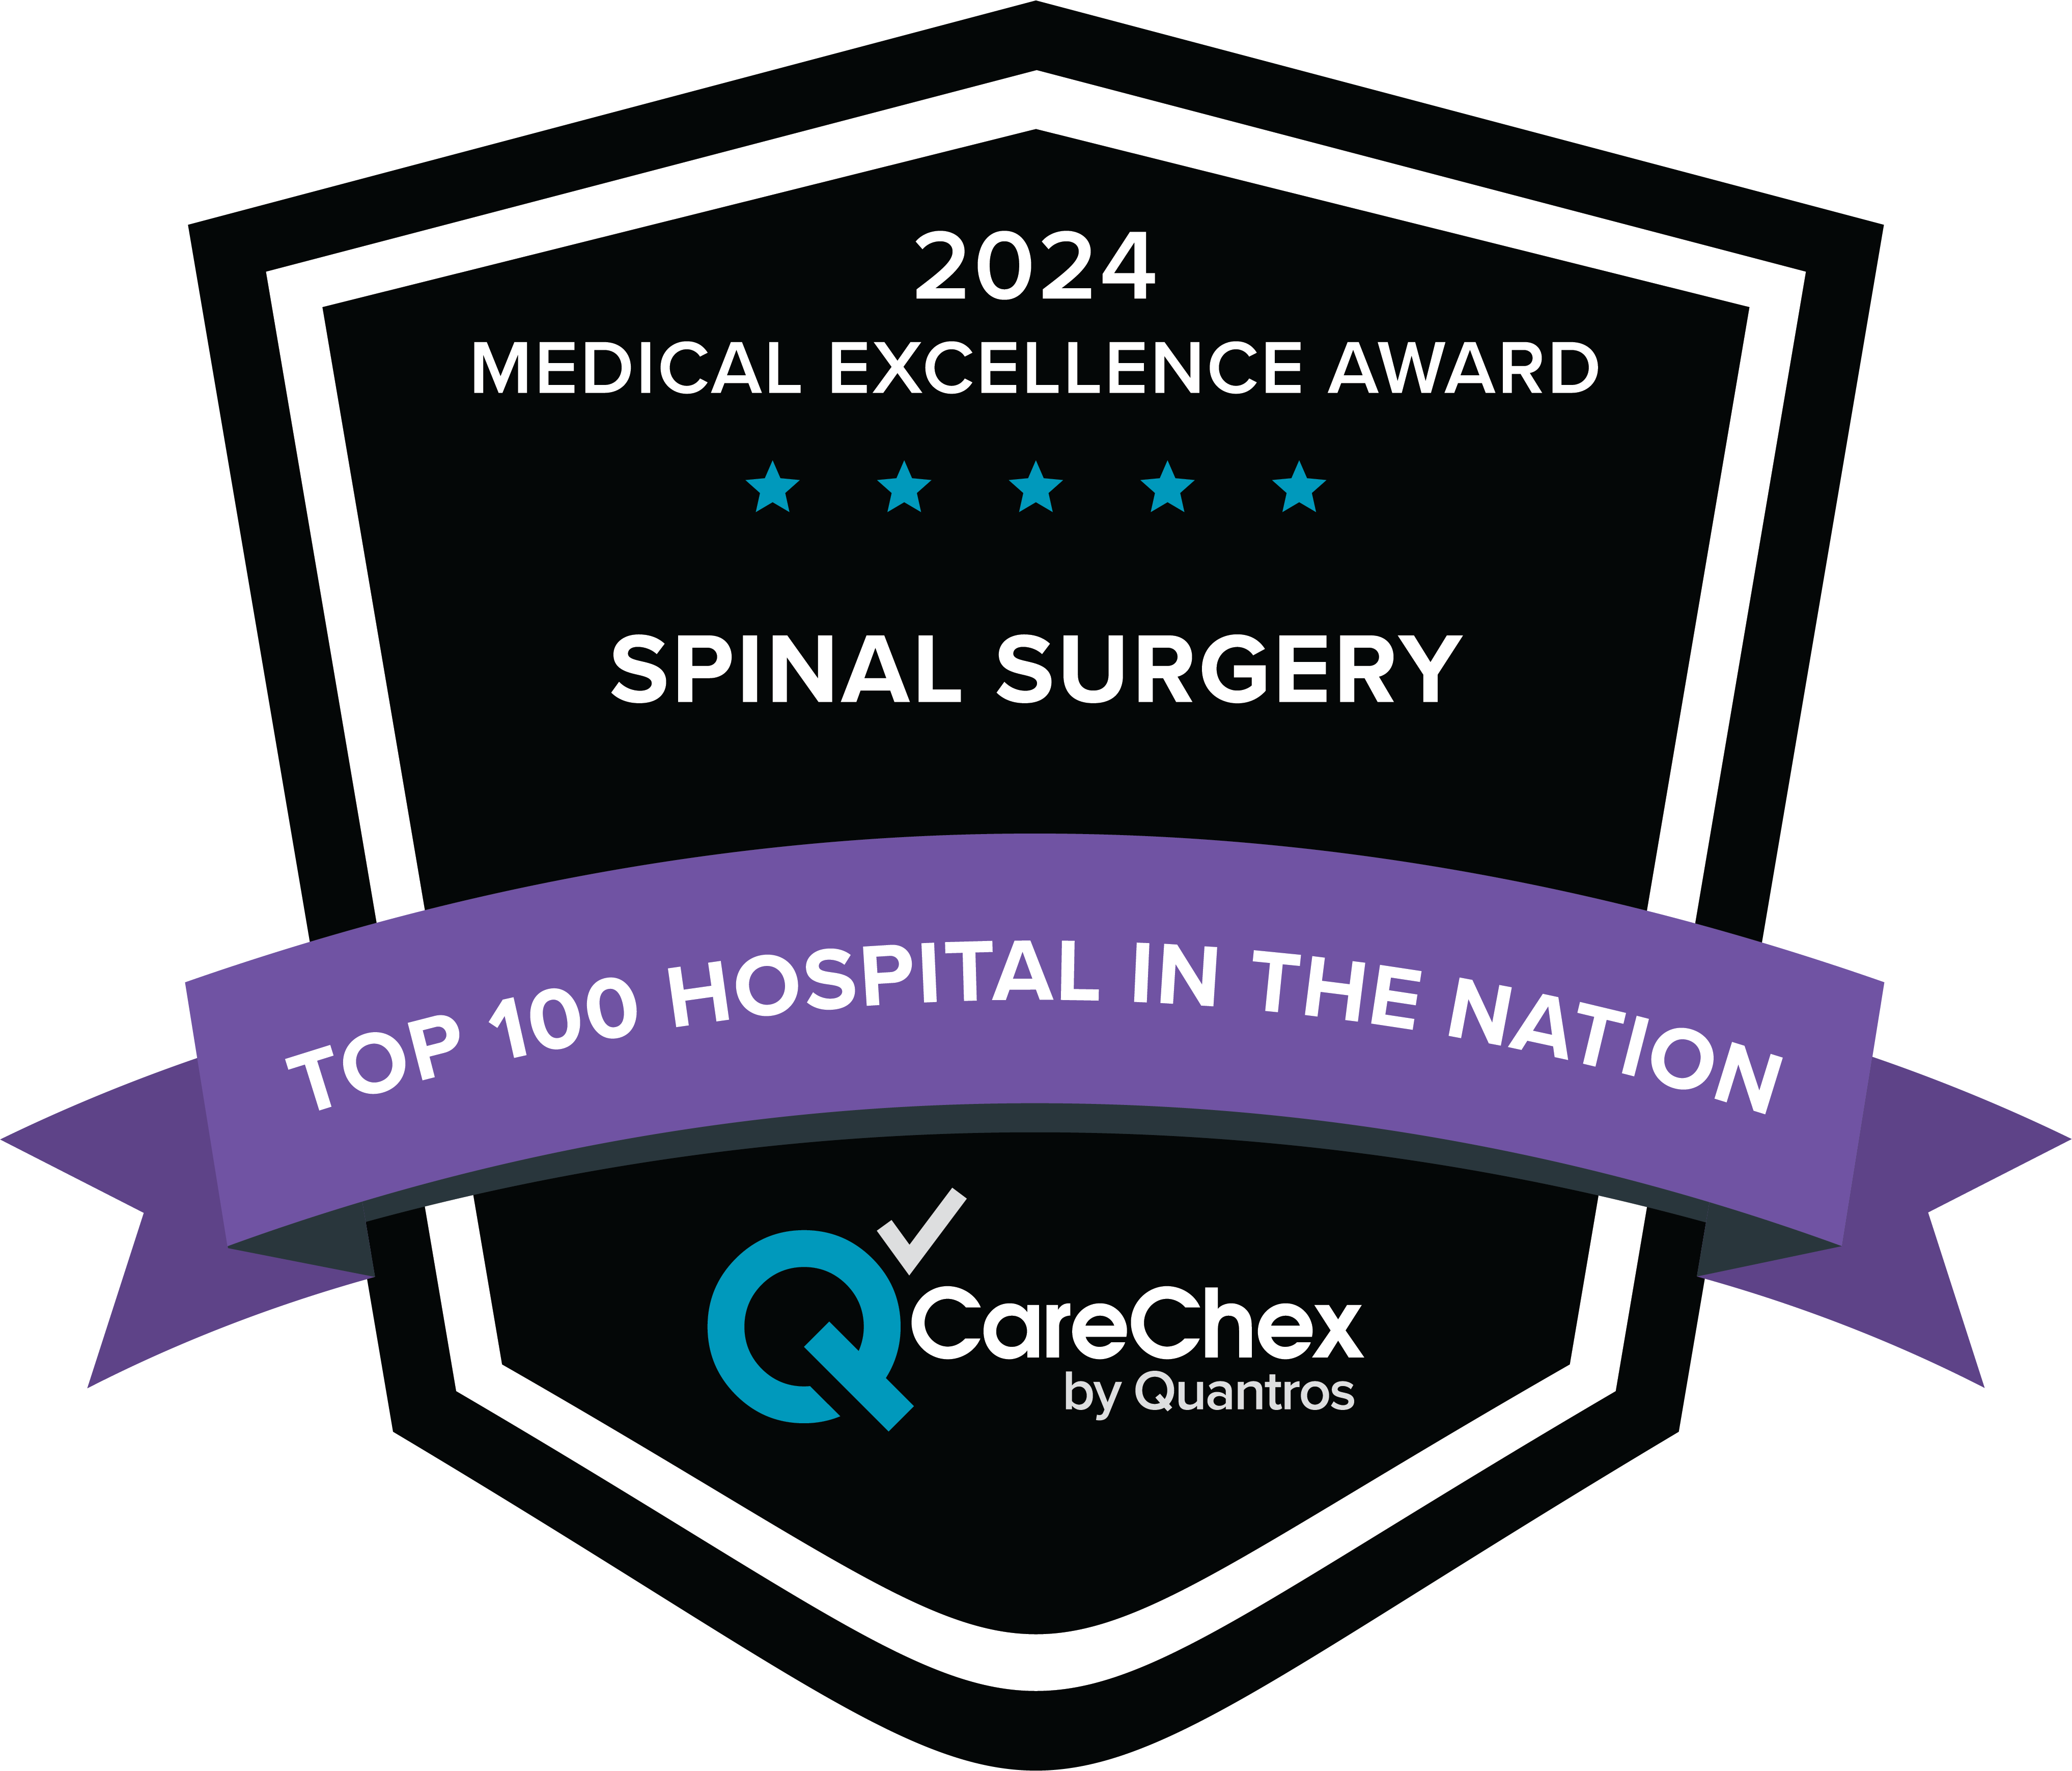 2024 Medical Excellence Award Spinal Surgery Top 100 Hospital in the Nation by CareChex award icon